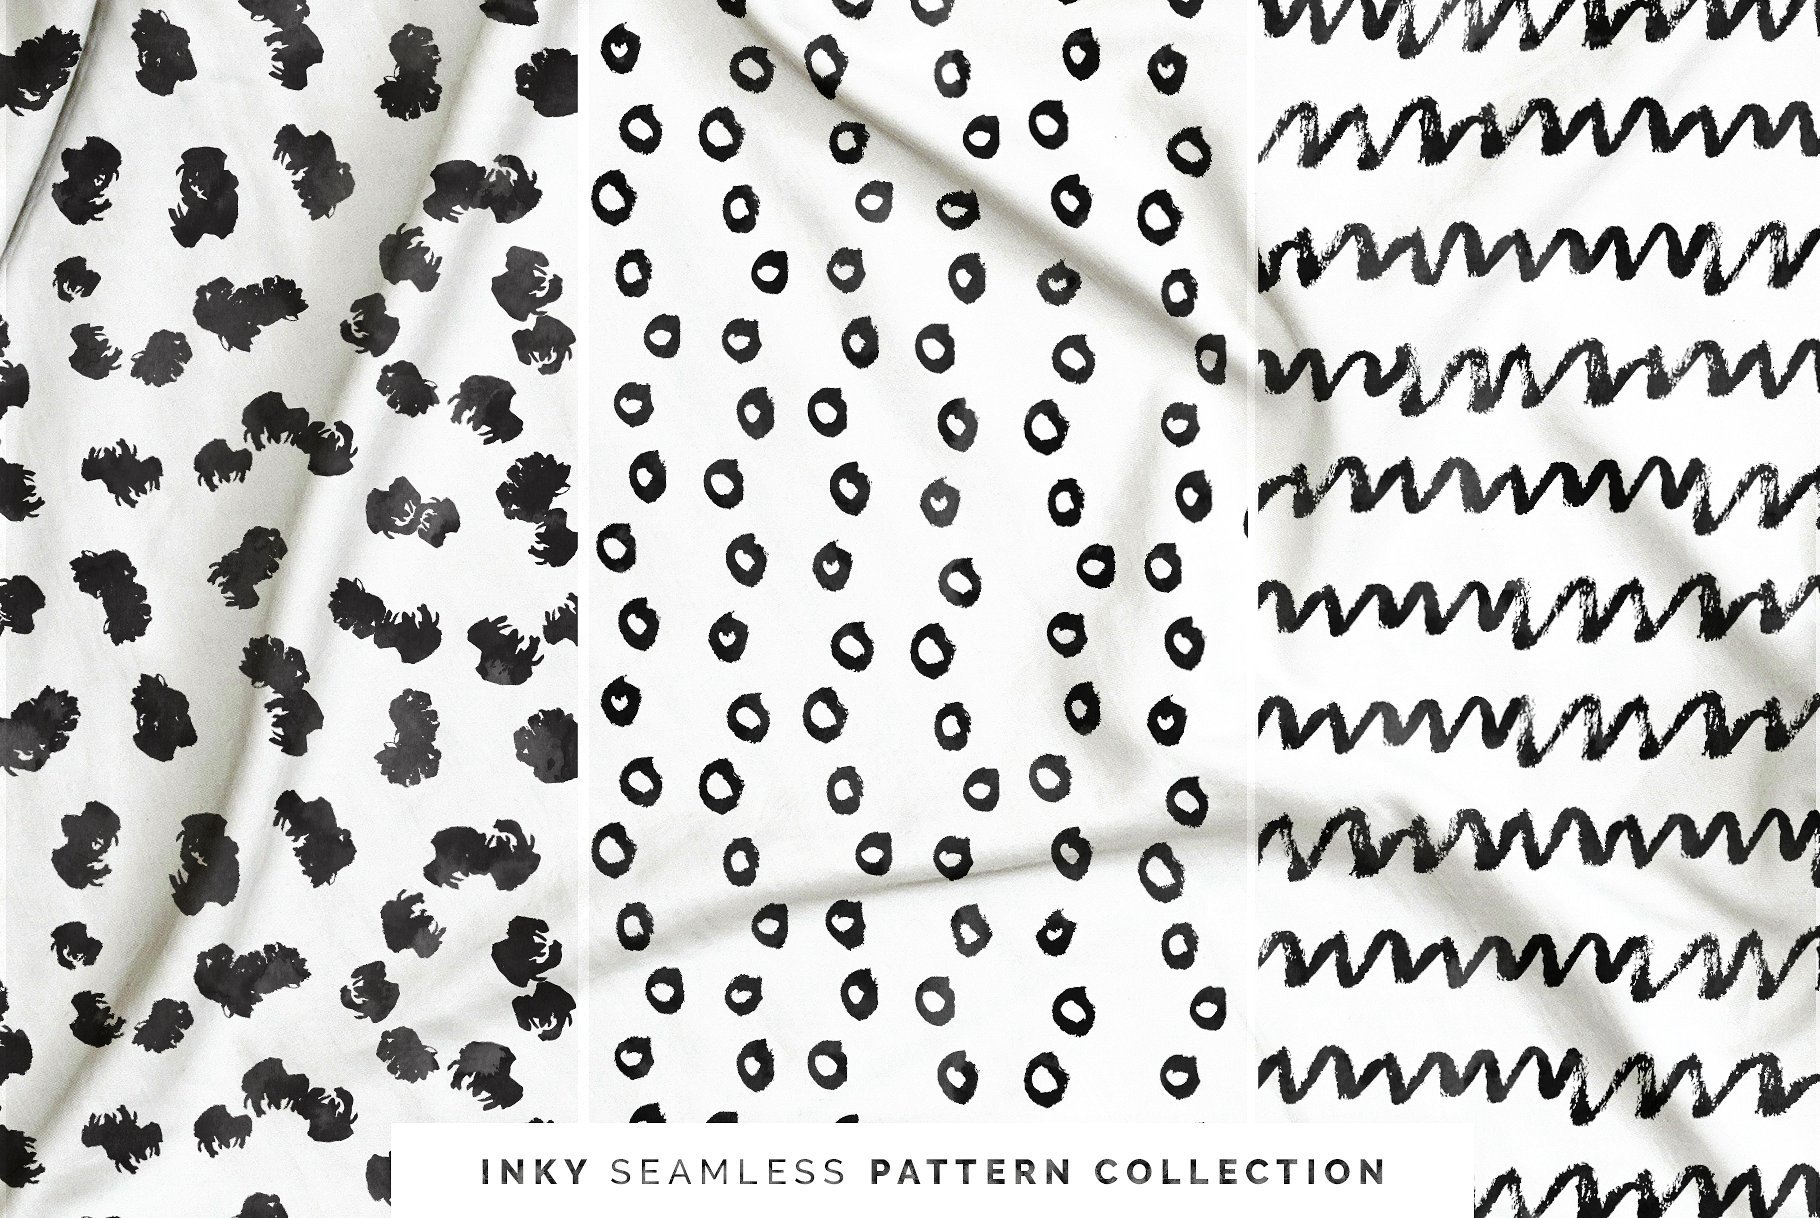 Inky Seamless Vector Patterns Vol. 2